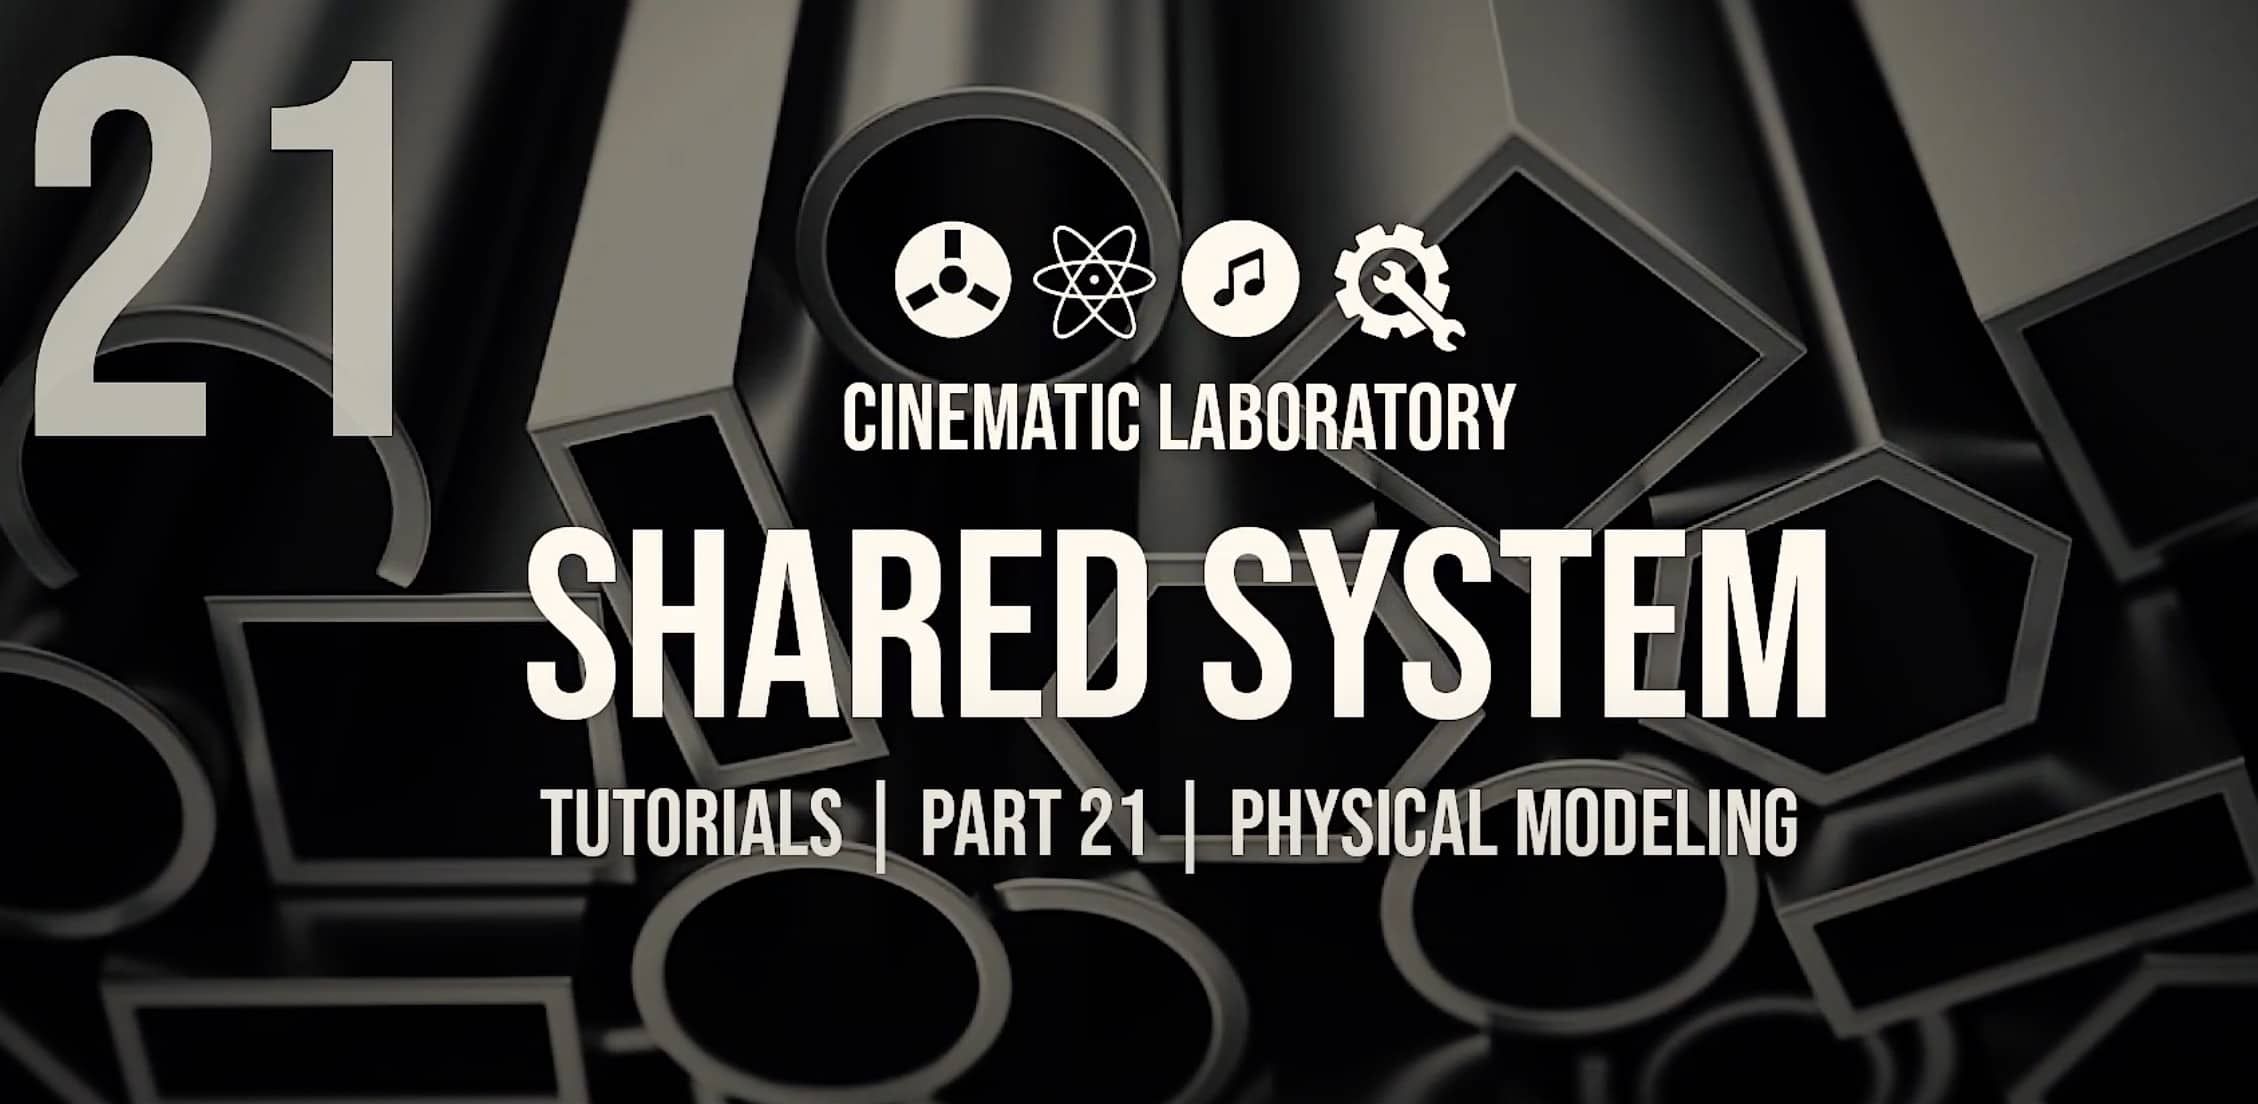 Shared System Tutorials Part 21 Physical Modeling